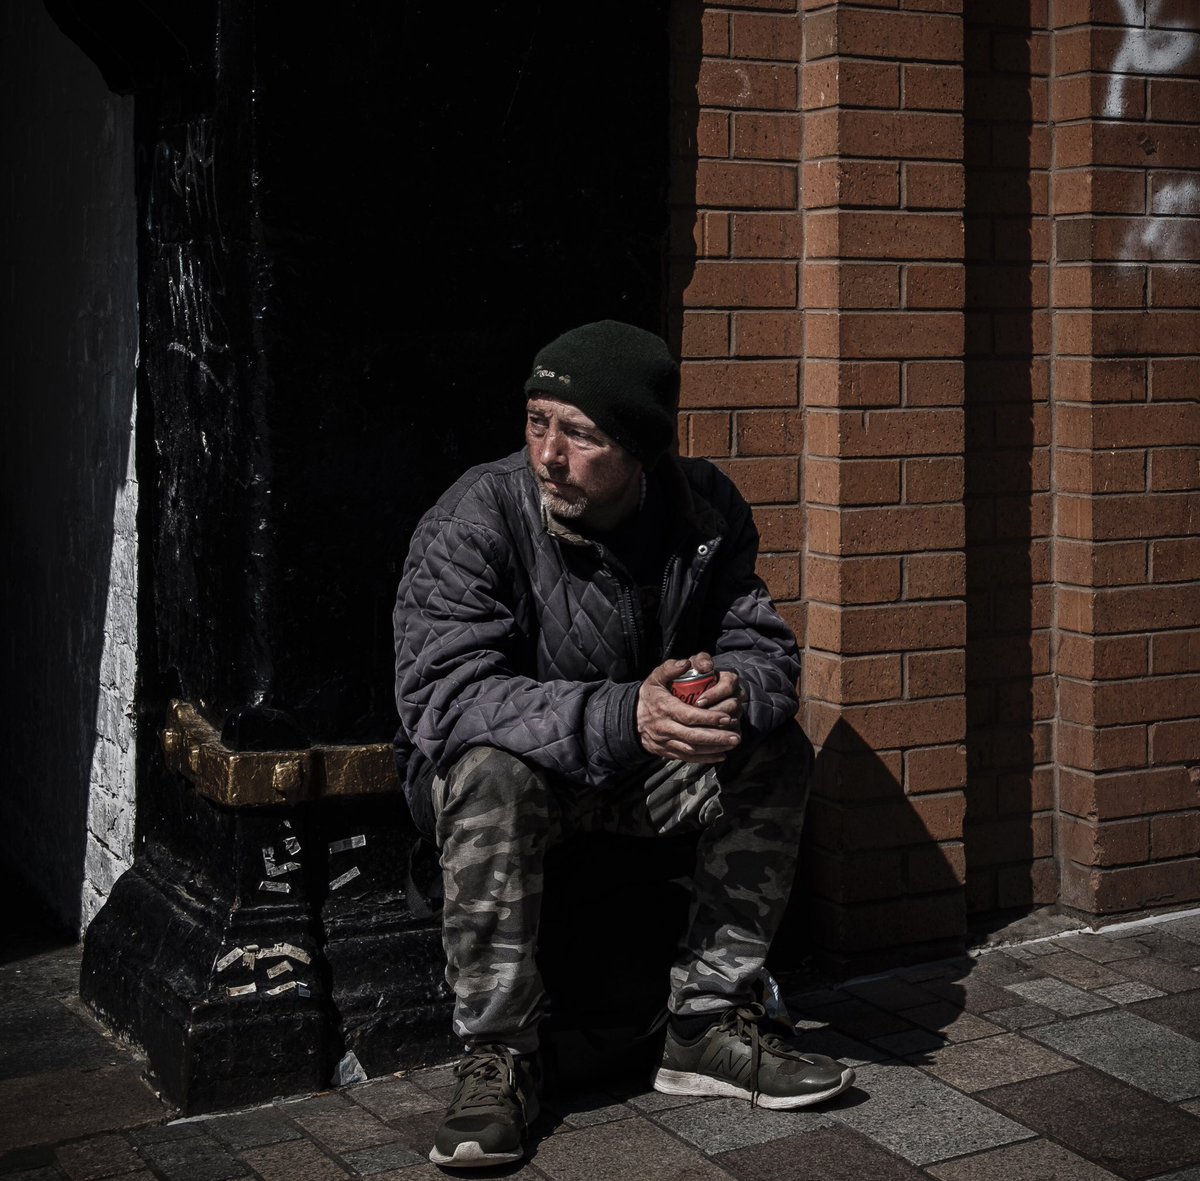 A life on the streets. #belfaststreets   #documentary-photography #fromstreetswithlove #capturestreets  #gf_streets #streetdreams #timeless_streets #streetphotographyworldwide #hcsc_street #obscureshots #streetphotographersmagazin #cobblescope #tnscollective